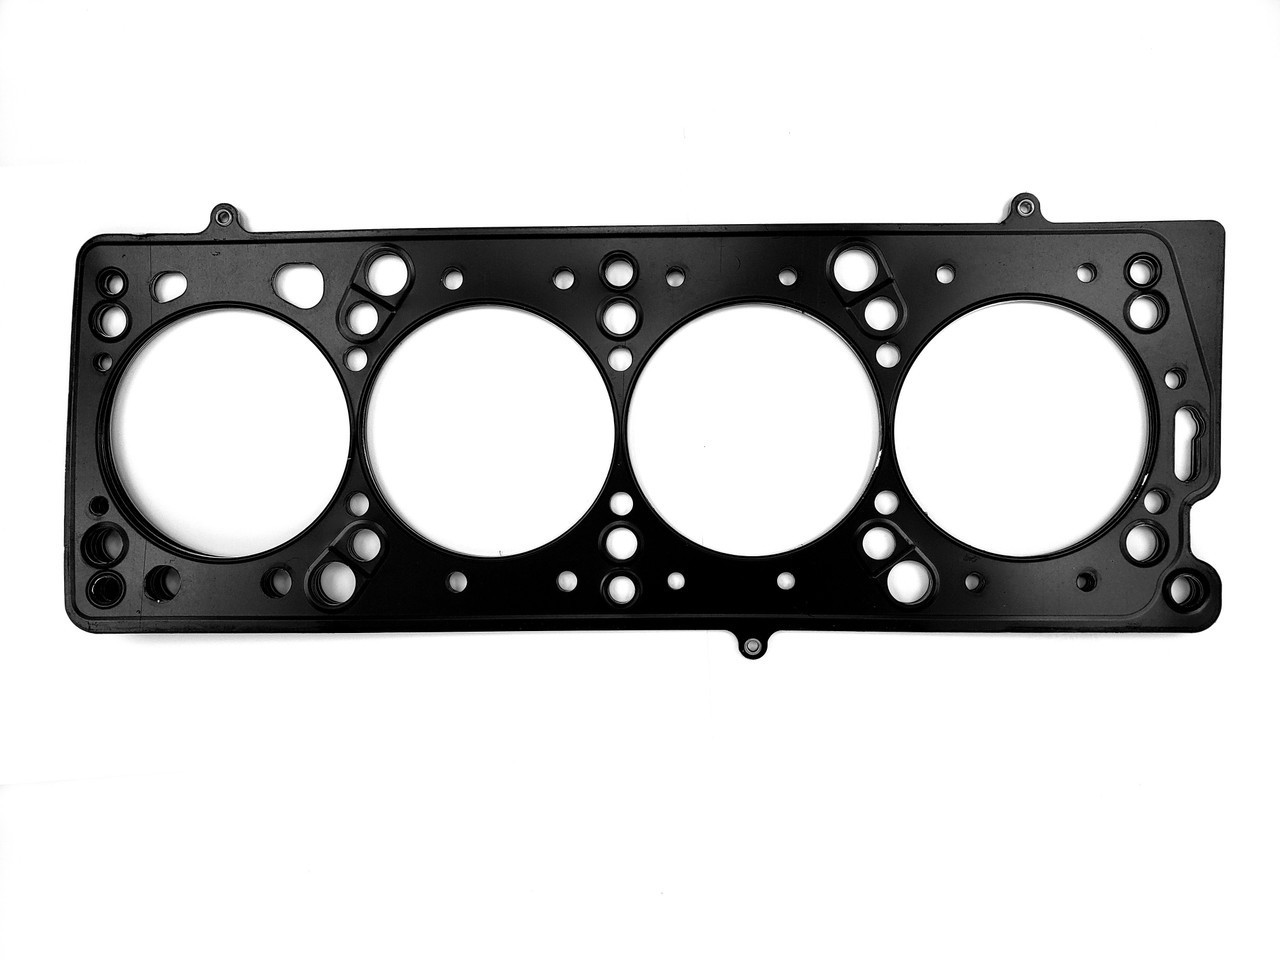 Head Gasket by Cleveland brand (made by Cometic in the USA)
High-Performance Multi-Layer Steel (MLS) design
FIAT 124 Spider, Spider 2000 and Pininfarina - 1974-1985 (1756 and 1995cc)
FIAT 124 Sport Coupe - 1974-1975
 - Auto Ricambi
4387624, GA3-405-Z